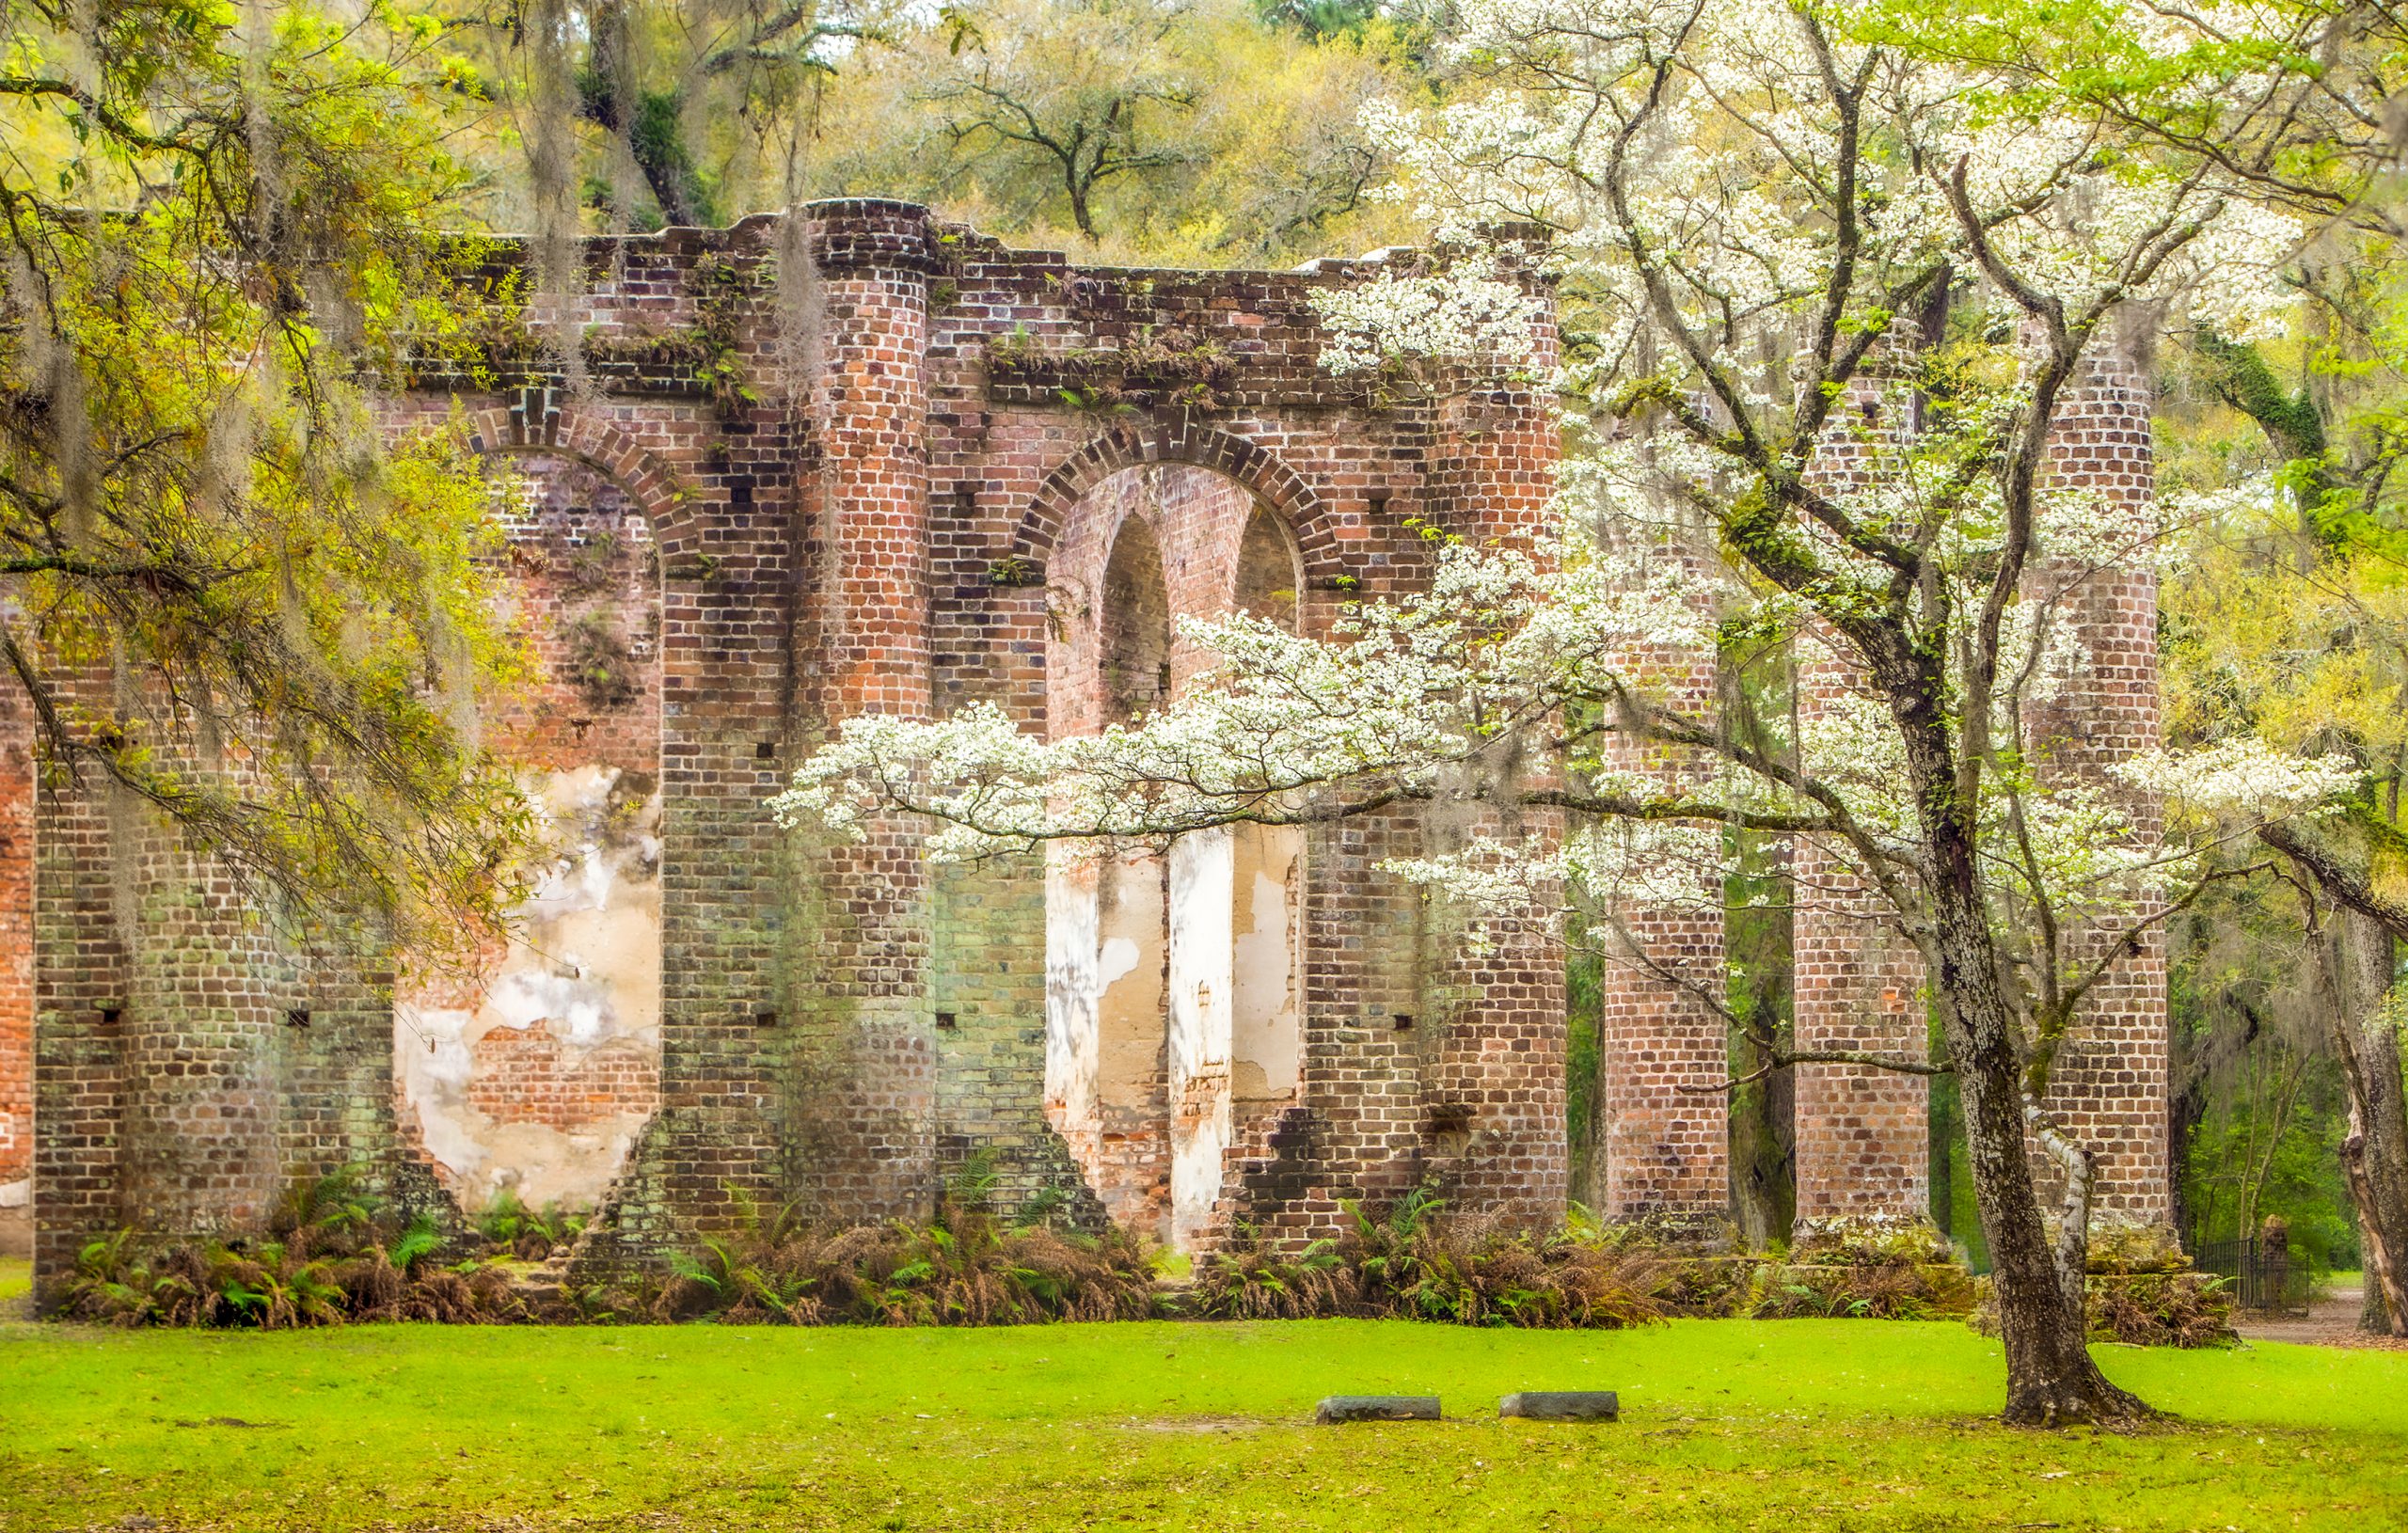 Flowering dogwoods stand out against the ruins of Prince William Parish Church, now known as Sheldon Church. The church’s architecture was the first attempt to imitate a Greek temple in America. 